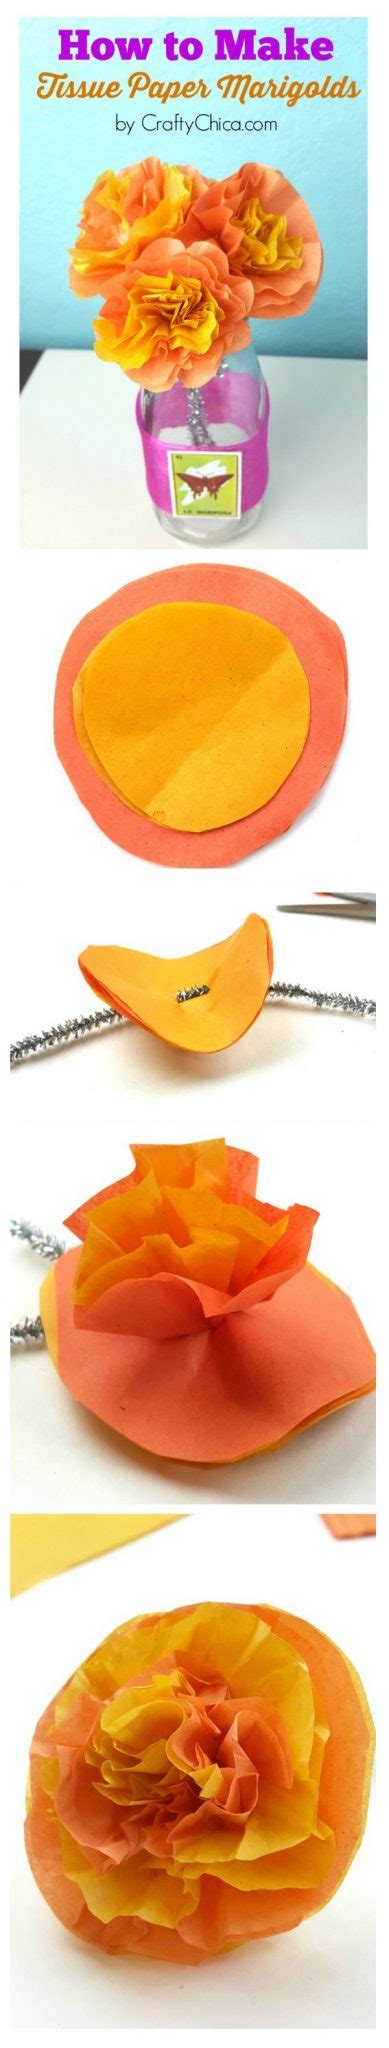 how-to-make-tissue-paper-marigolds-crafty-chica image